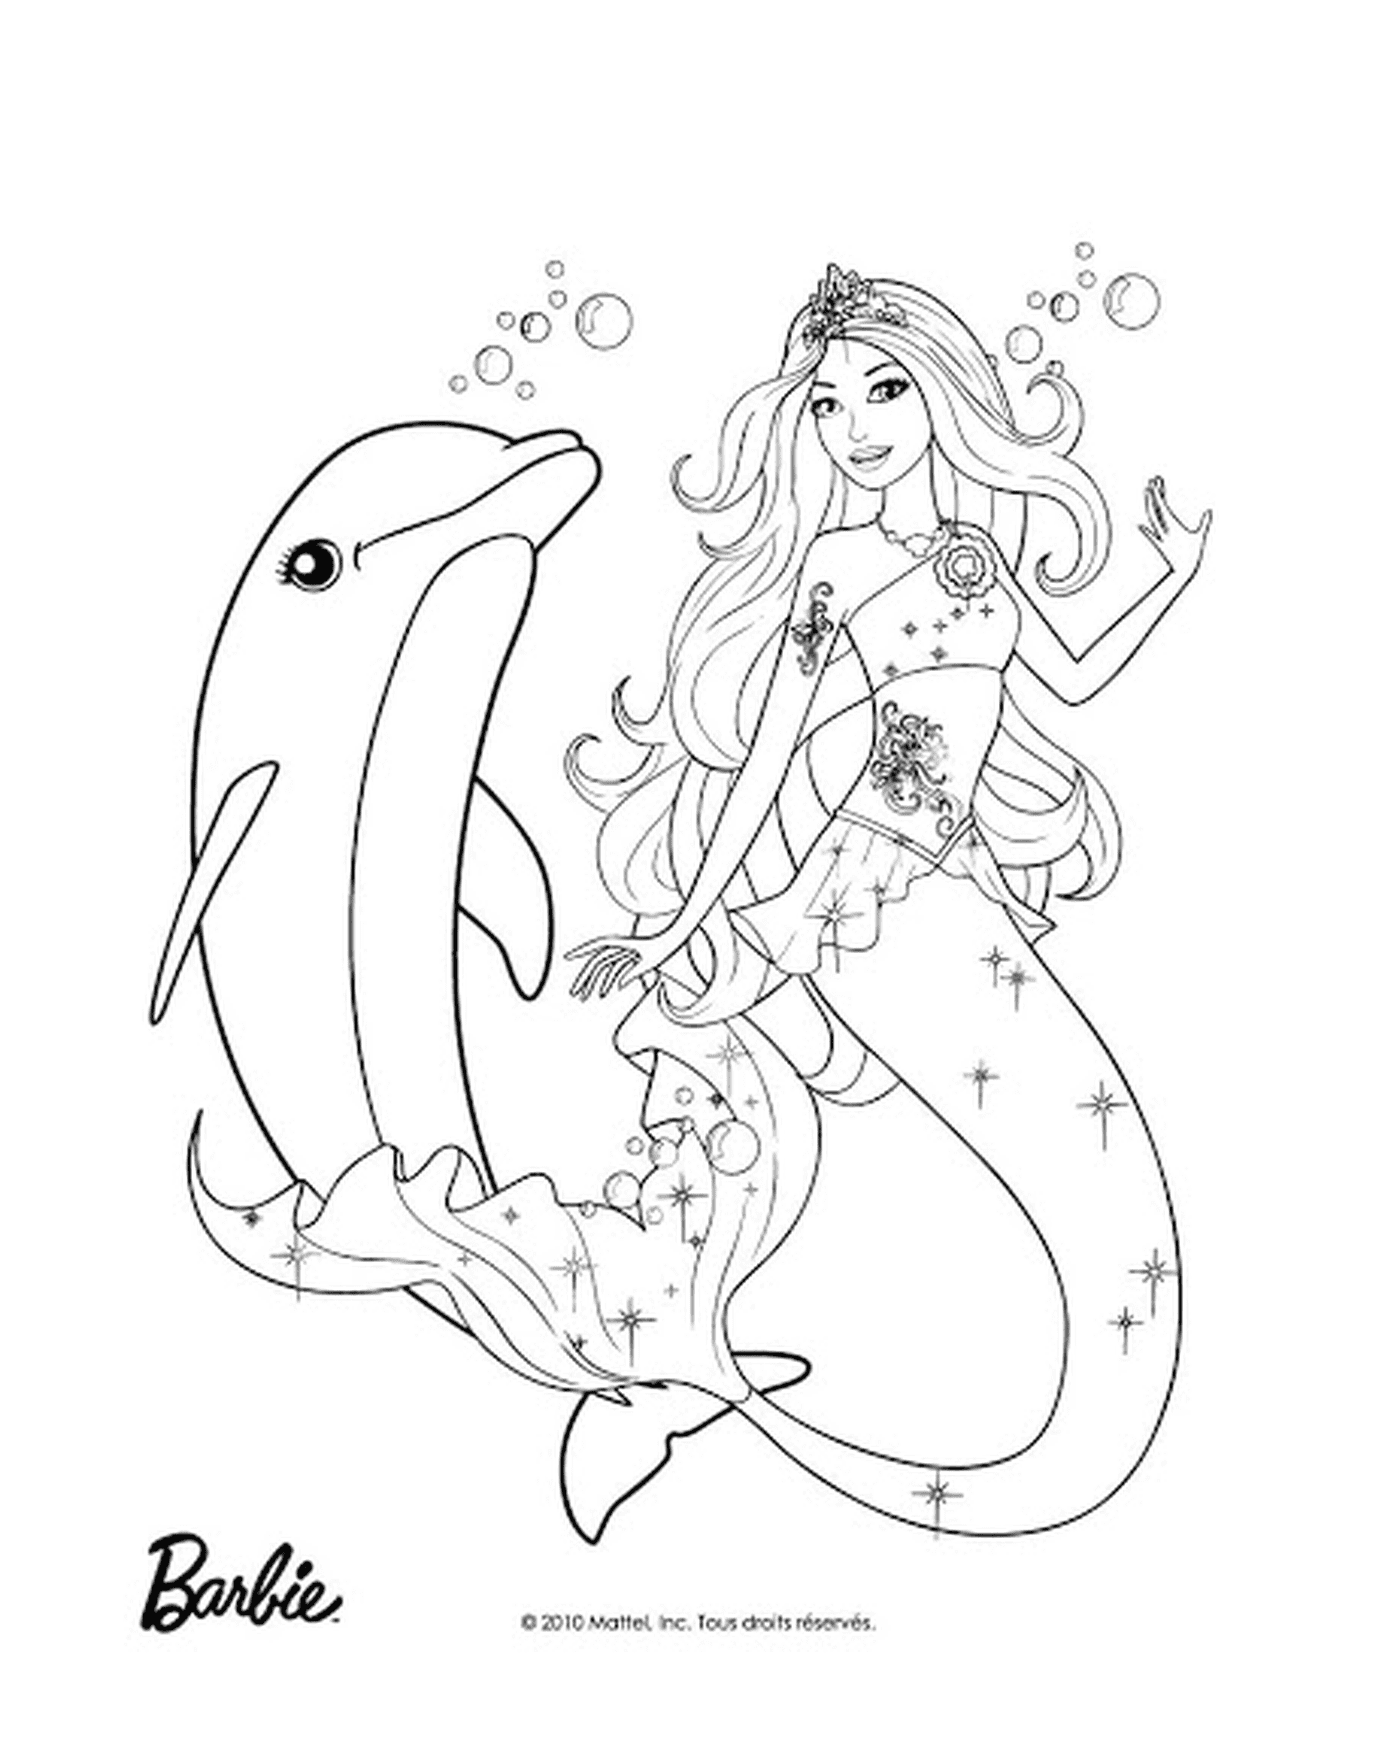  A mermaid and a dolphin 